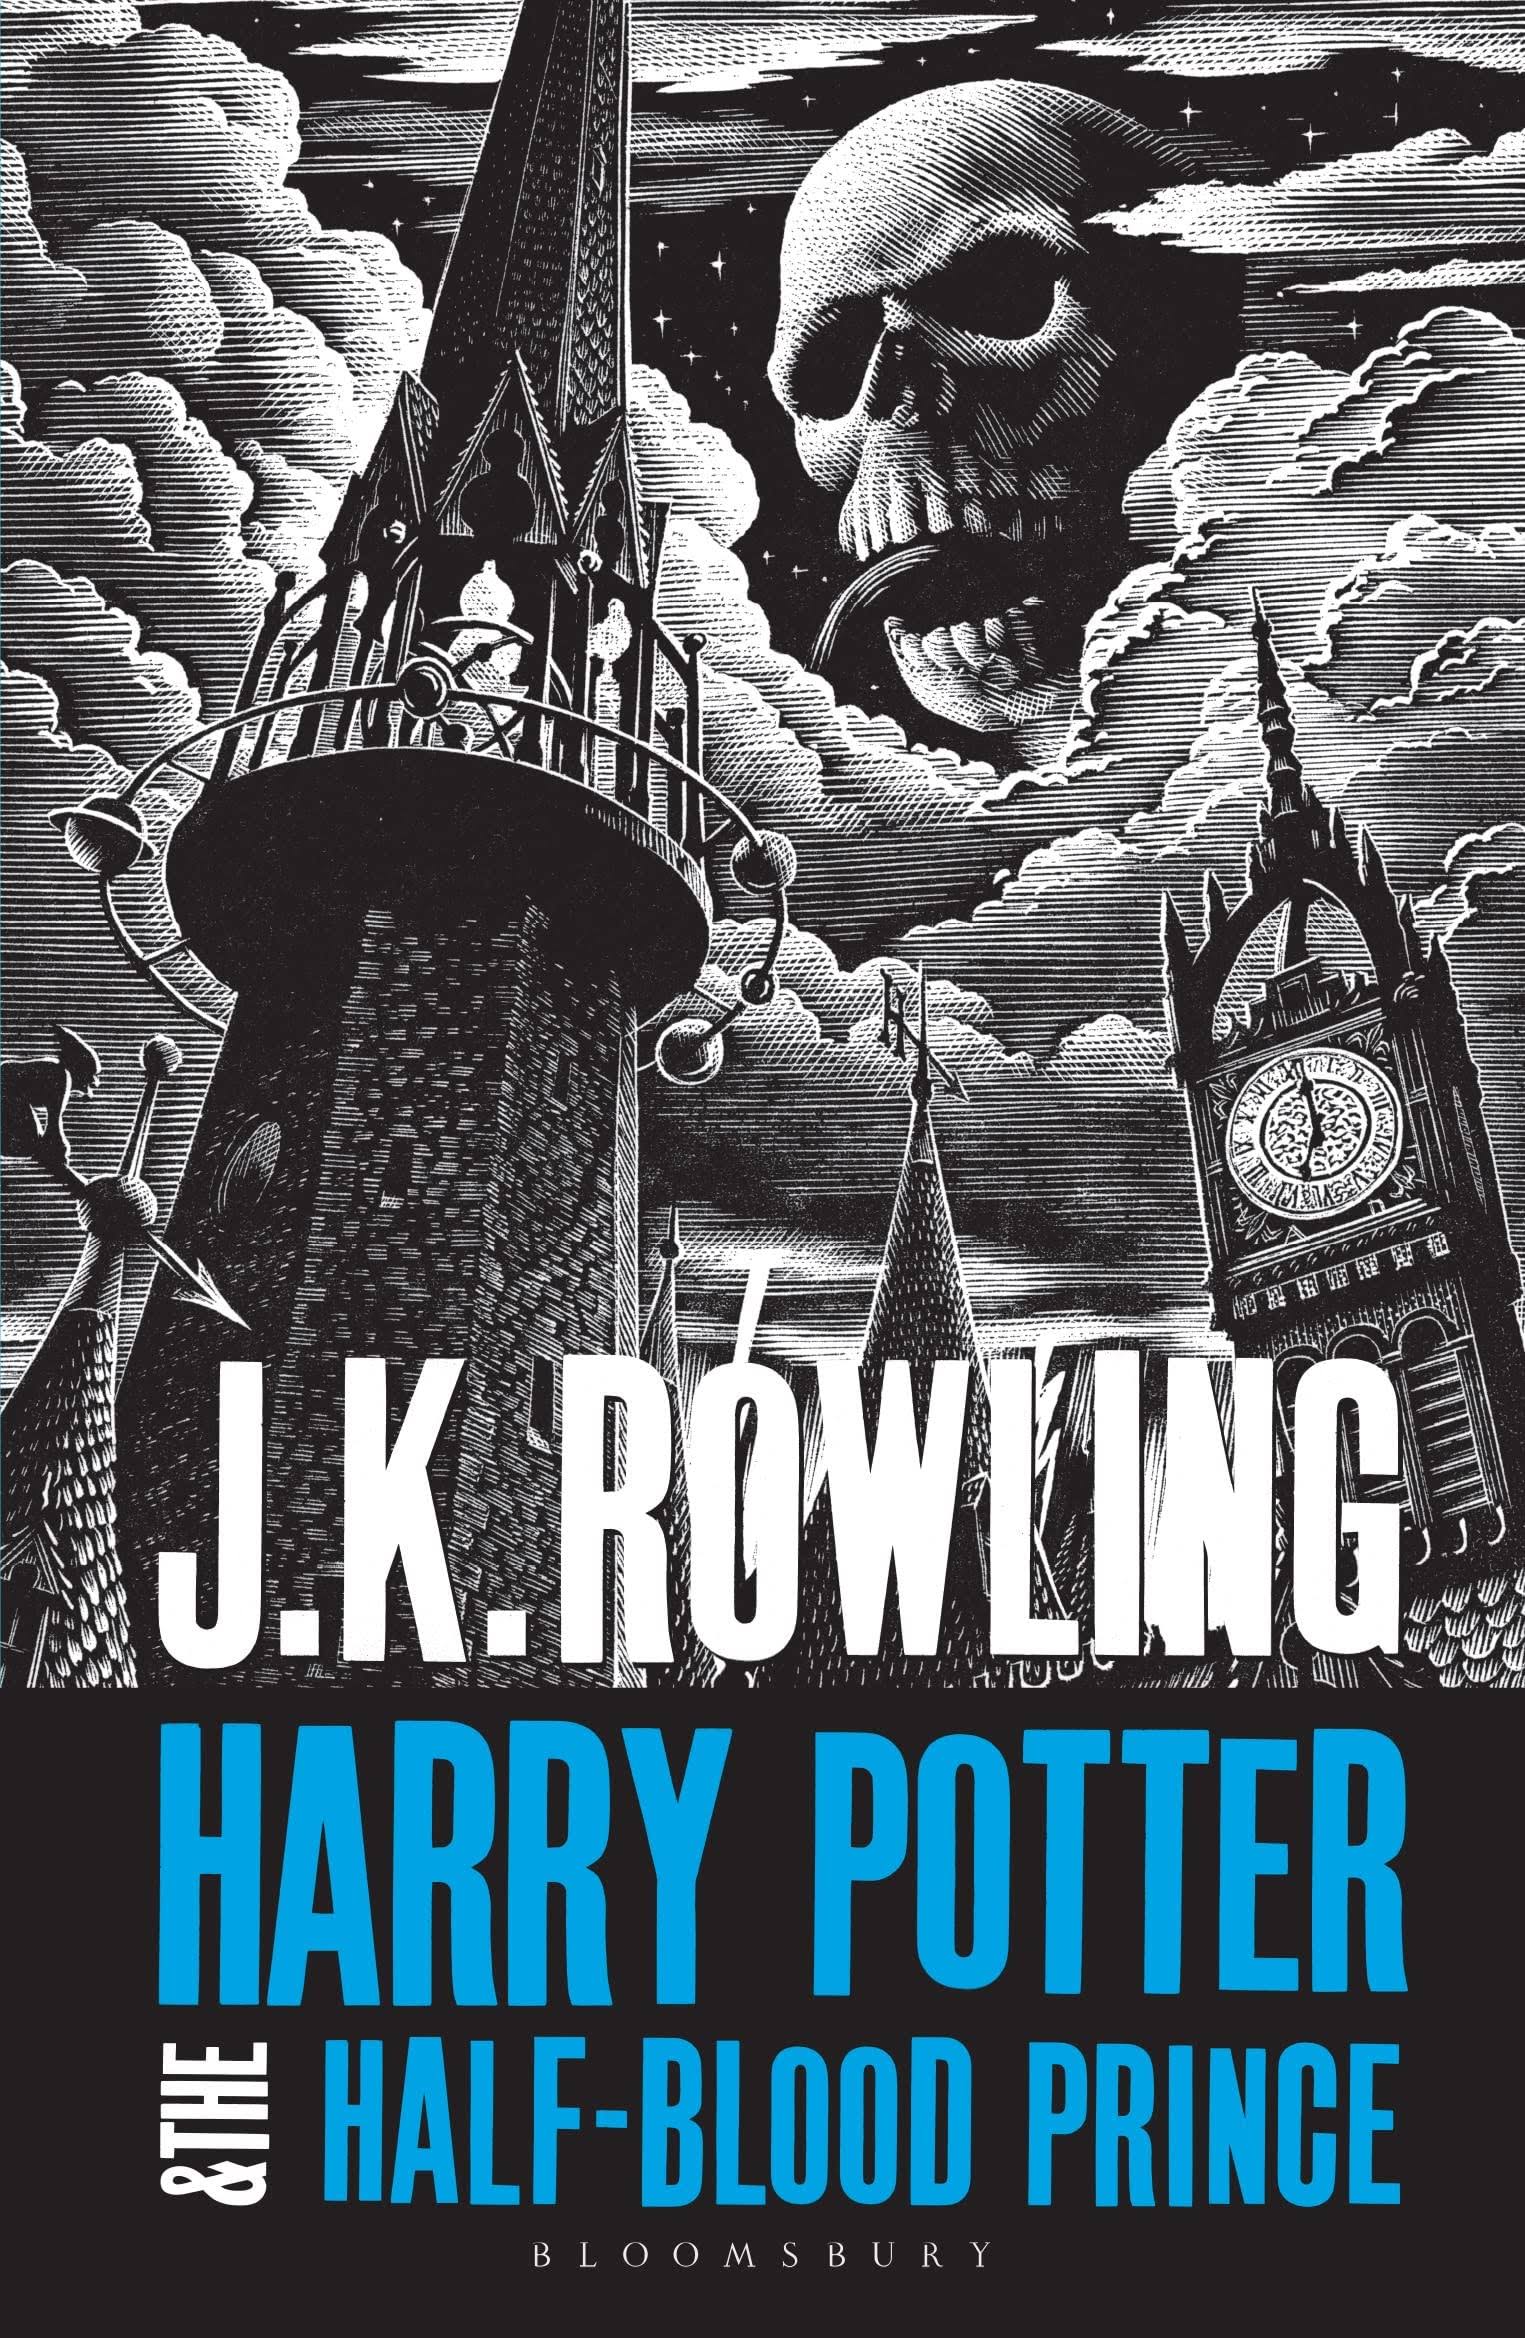 Harry Potter and The Half-Blood Prince (UK, Paperback)